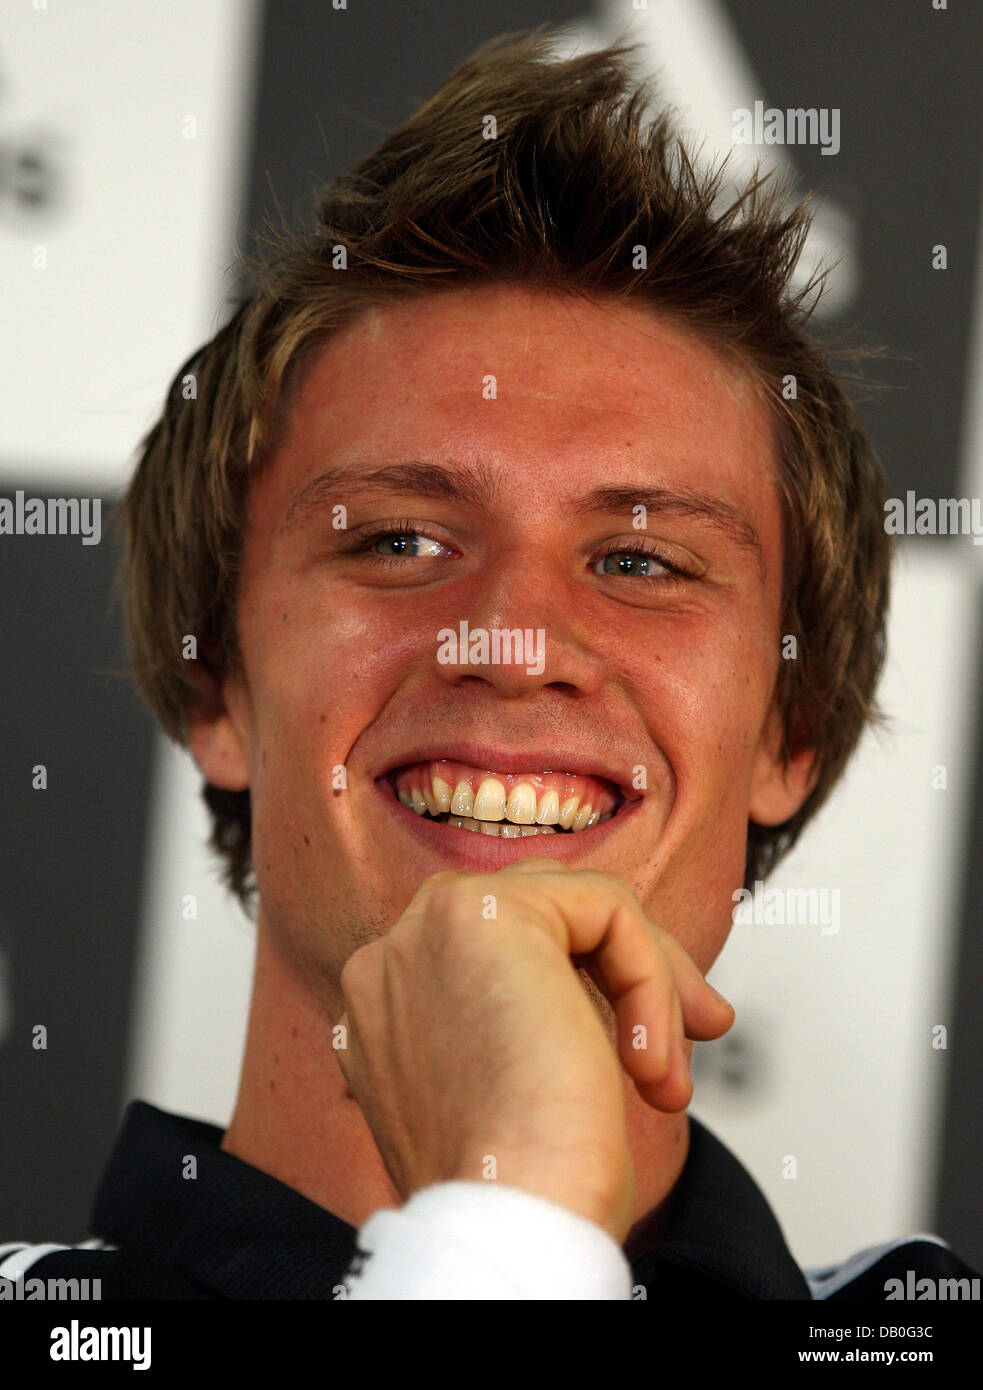 Norwegian javelin thrower Andreas Thorkildsen poses during a sponsor's photo call prior to the 11th 'IAAF World Championships in Athletics' in Osaka, Japan, 24 August 2007. The championship begins on Saturday, 25 August. Photo: Gero Breloer Stock Photo